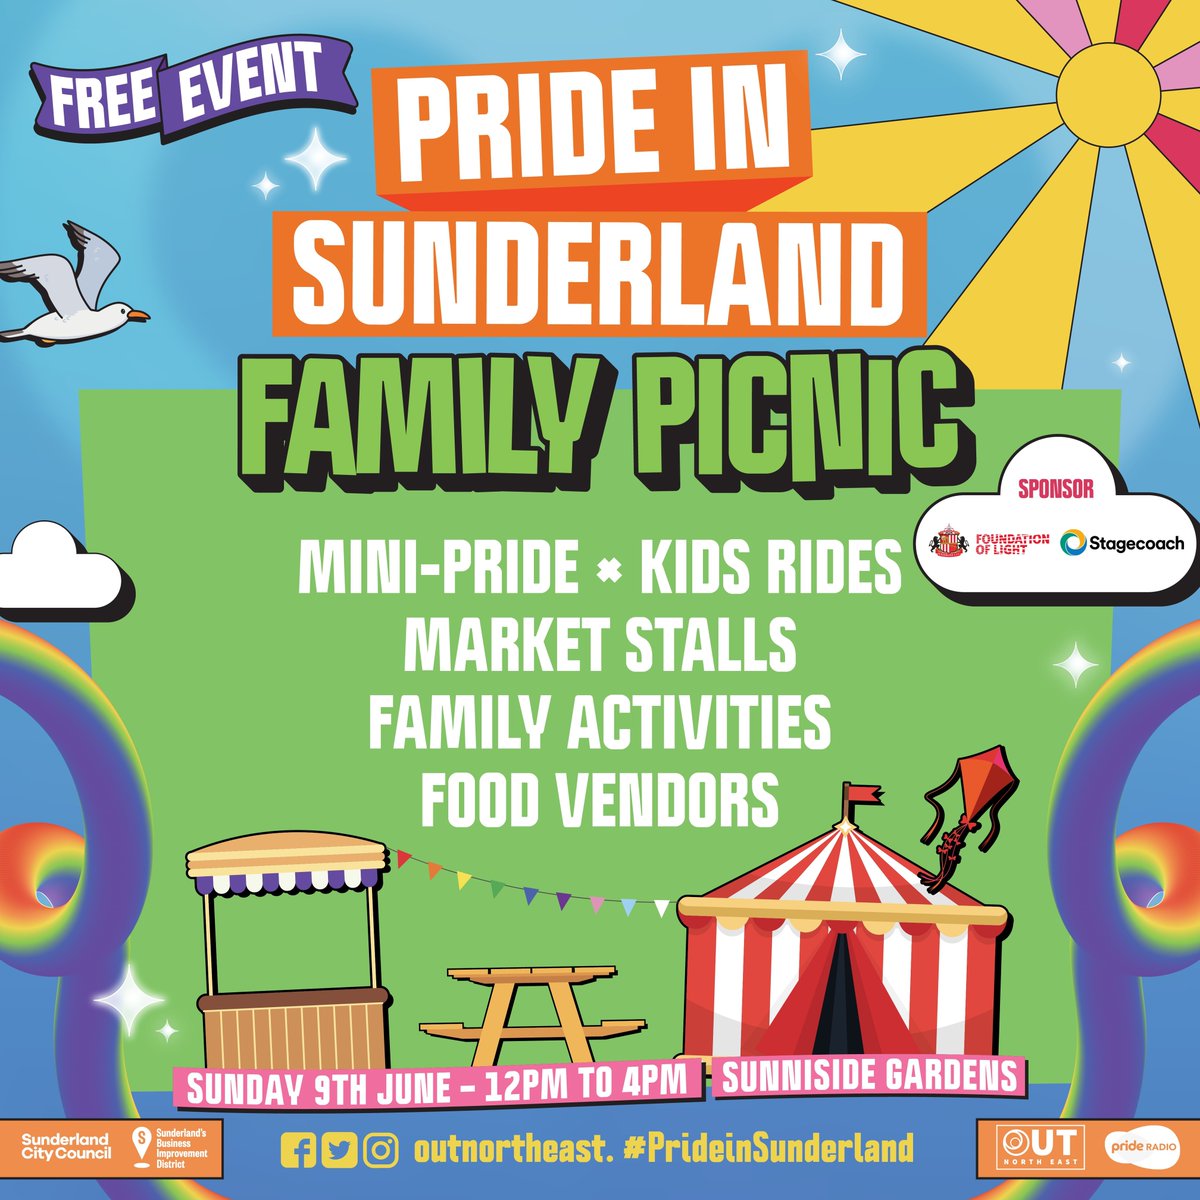 Pride in Sunderland Family Picnic! 🌈 Join us as we turn Sunniside Gardens into a family pride picnic arena with a mini-pride, music, activities, craft stalls, story corner, kids rides, market stalls, food vendors and more. orlo.uk/tcAOs